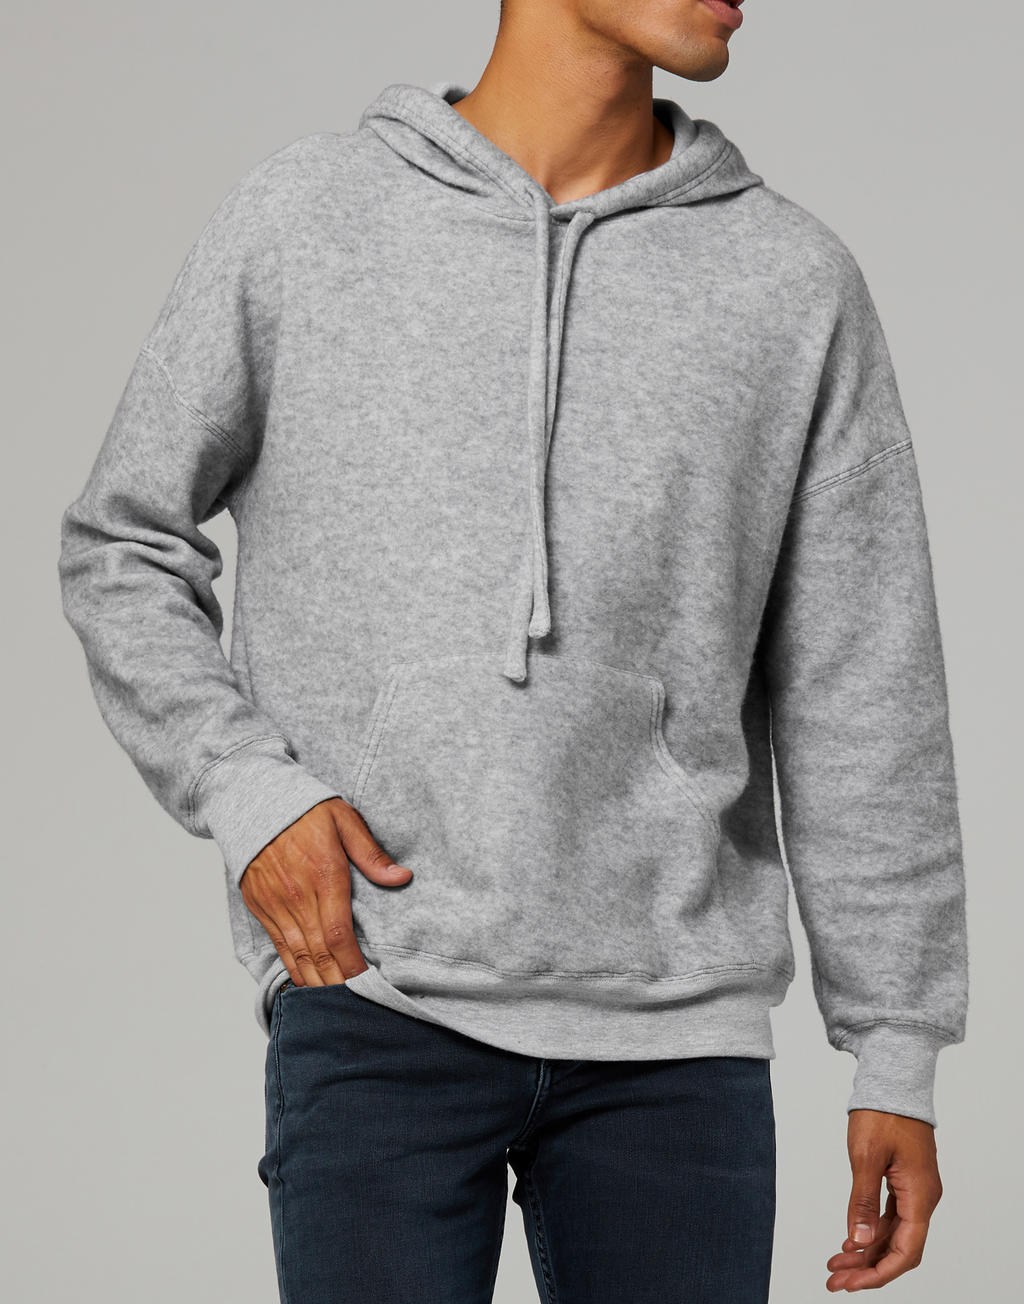  Unisex Sueded Fleece Pullover Hoodie in Farbe Athletic Heather